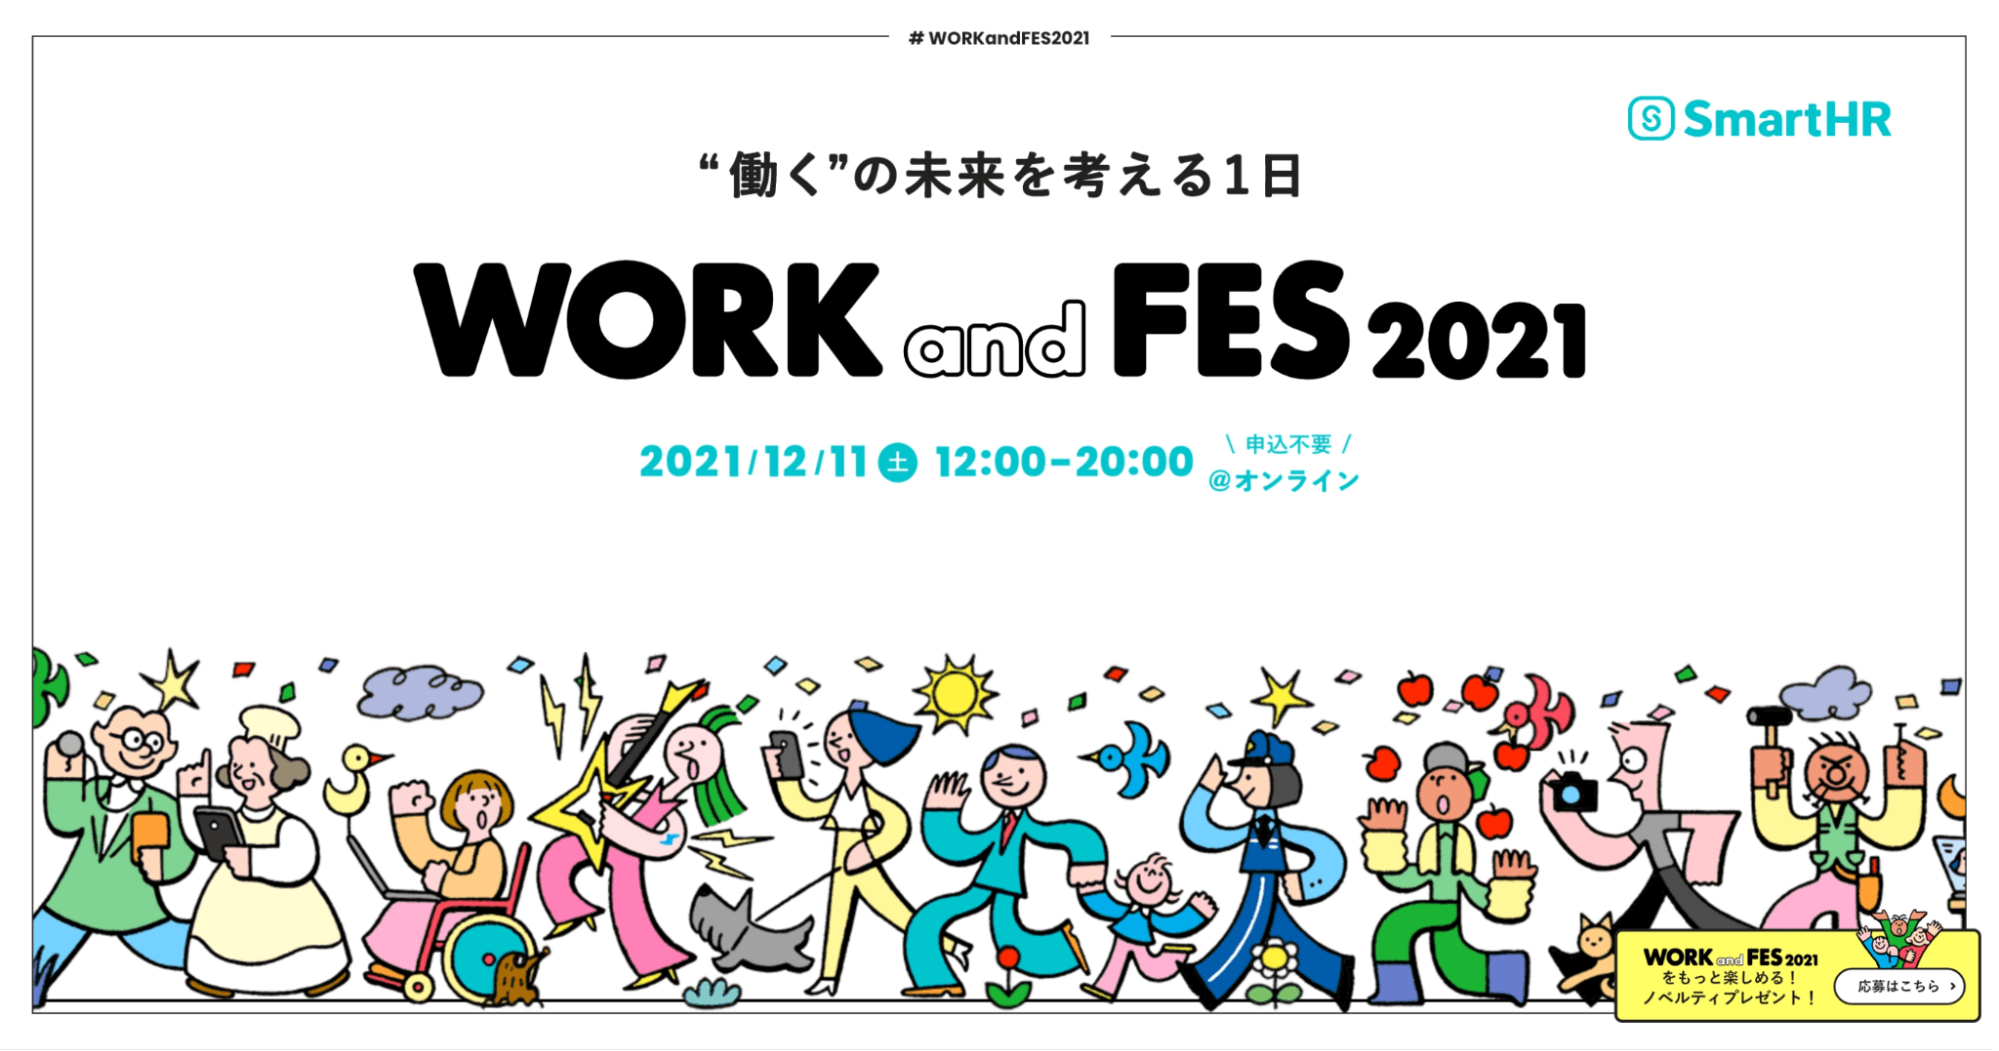 「WORK and FES 2021」画像(再掲)。